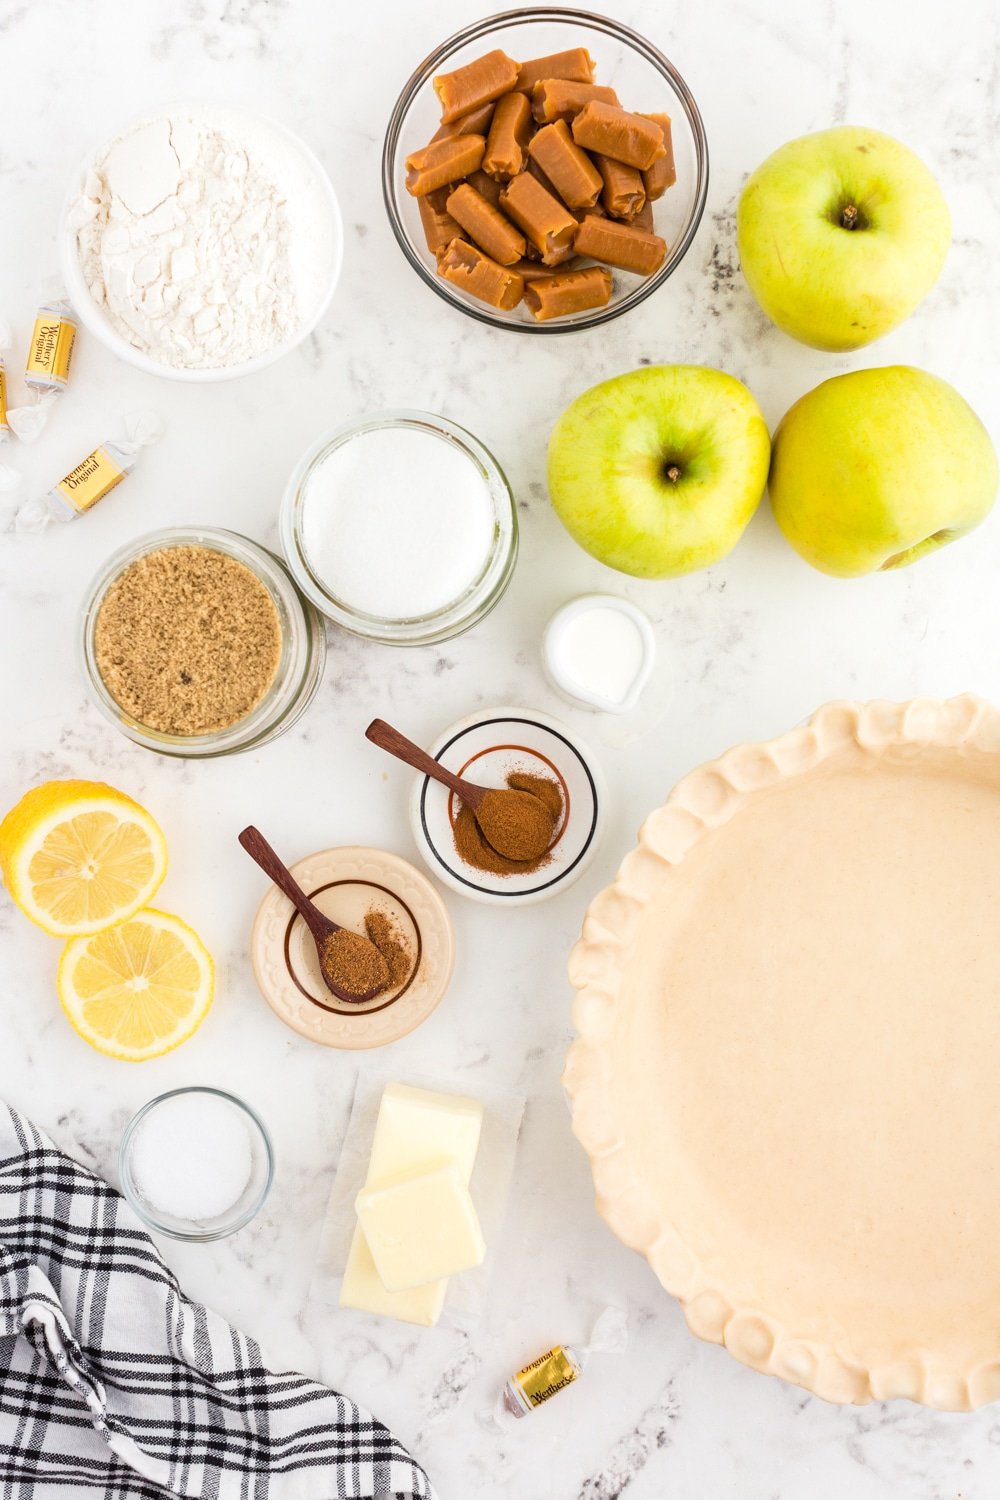 Pie crust pressed into a pie dish, black and white checkered linen, whole green apples, lemon halves, bowl of caramel candies, bowl of flour, bowl of light brown sugar, bowl of granulated sugar, small bowls of nutmeg and cinnamon, butter, on a white marble countertop.